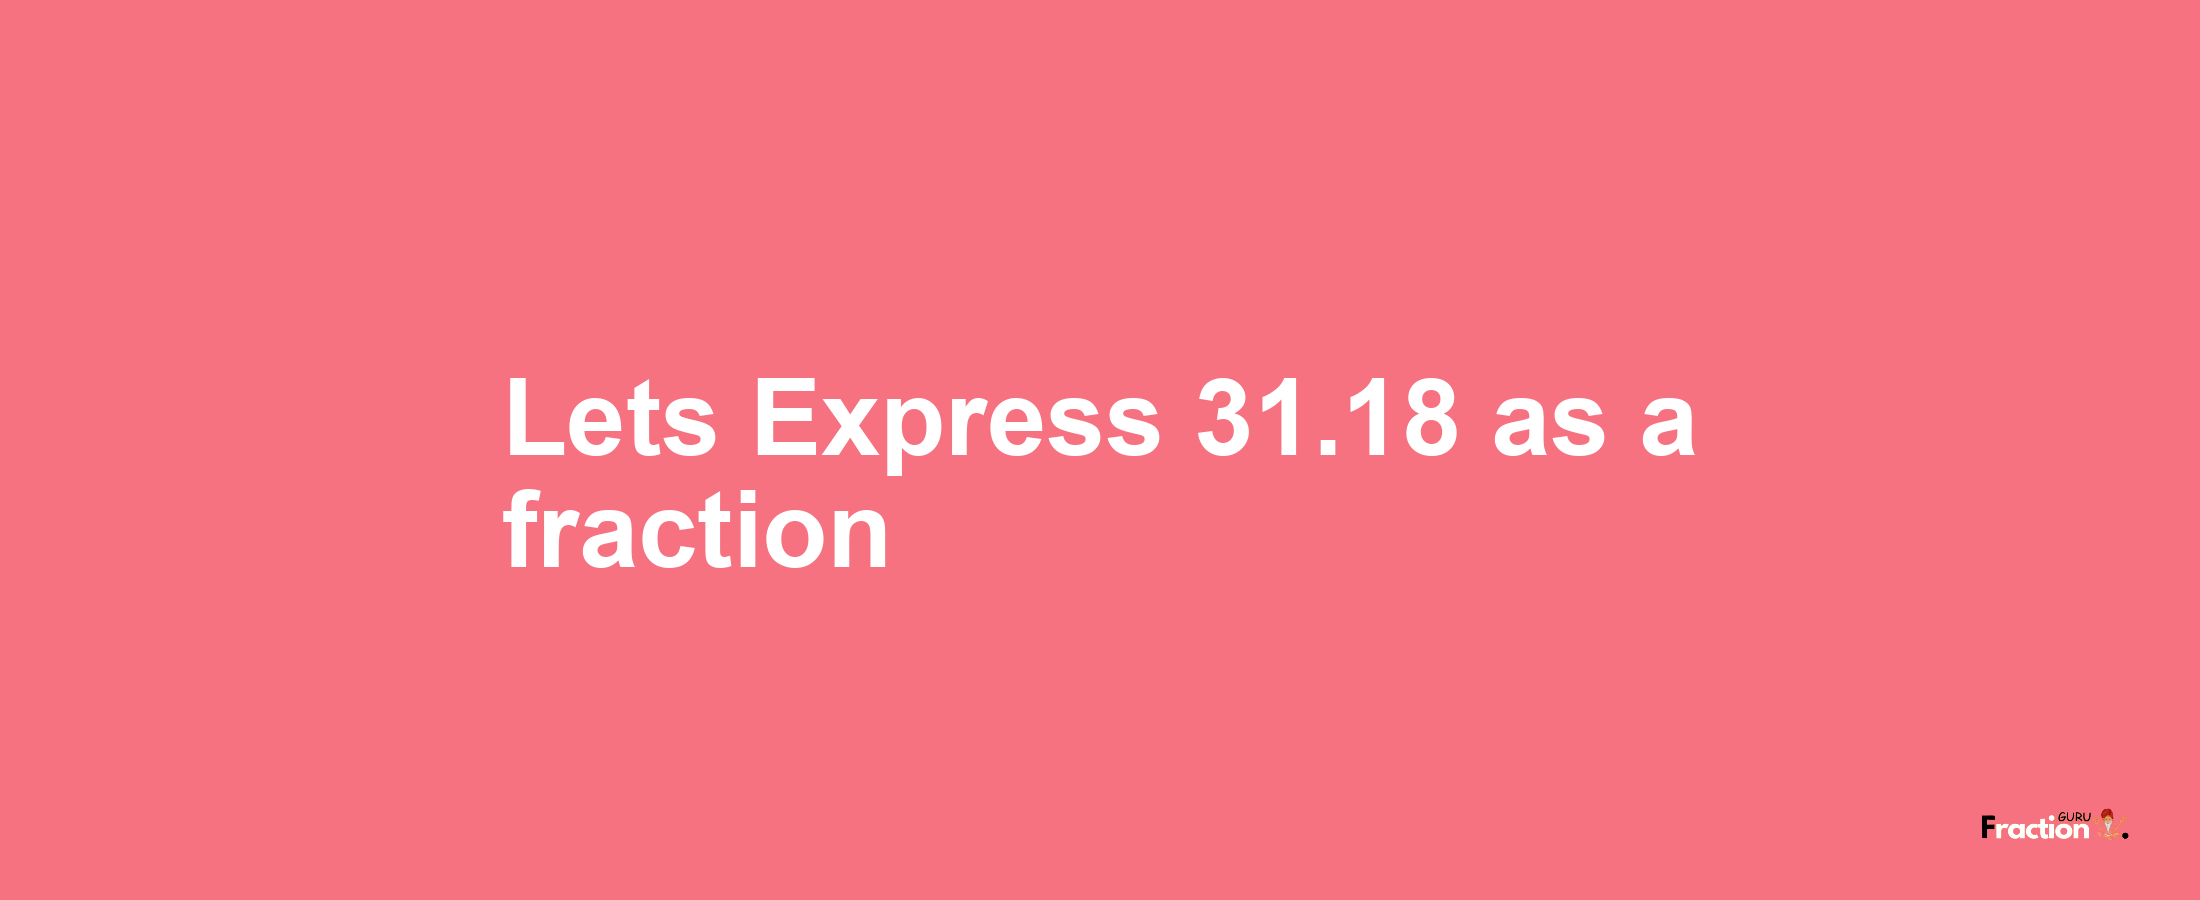 Lets Express 31.18 as afraction